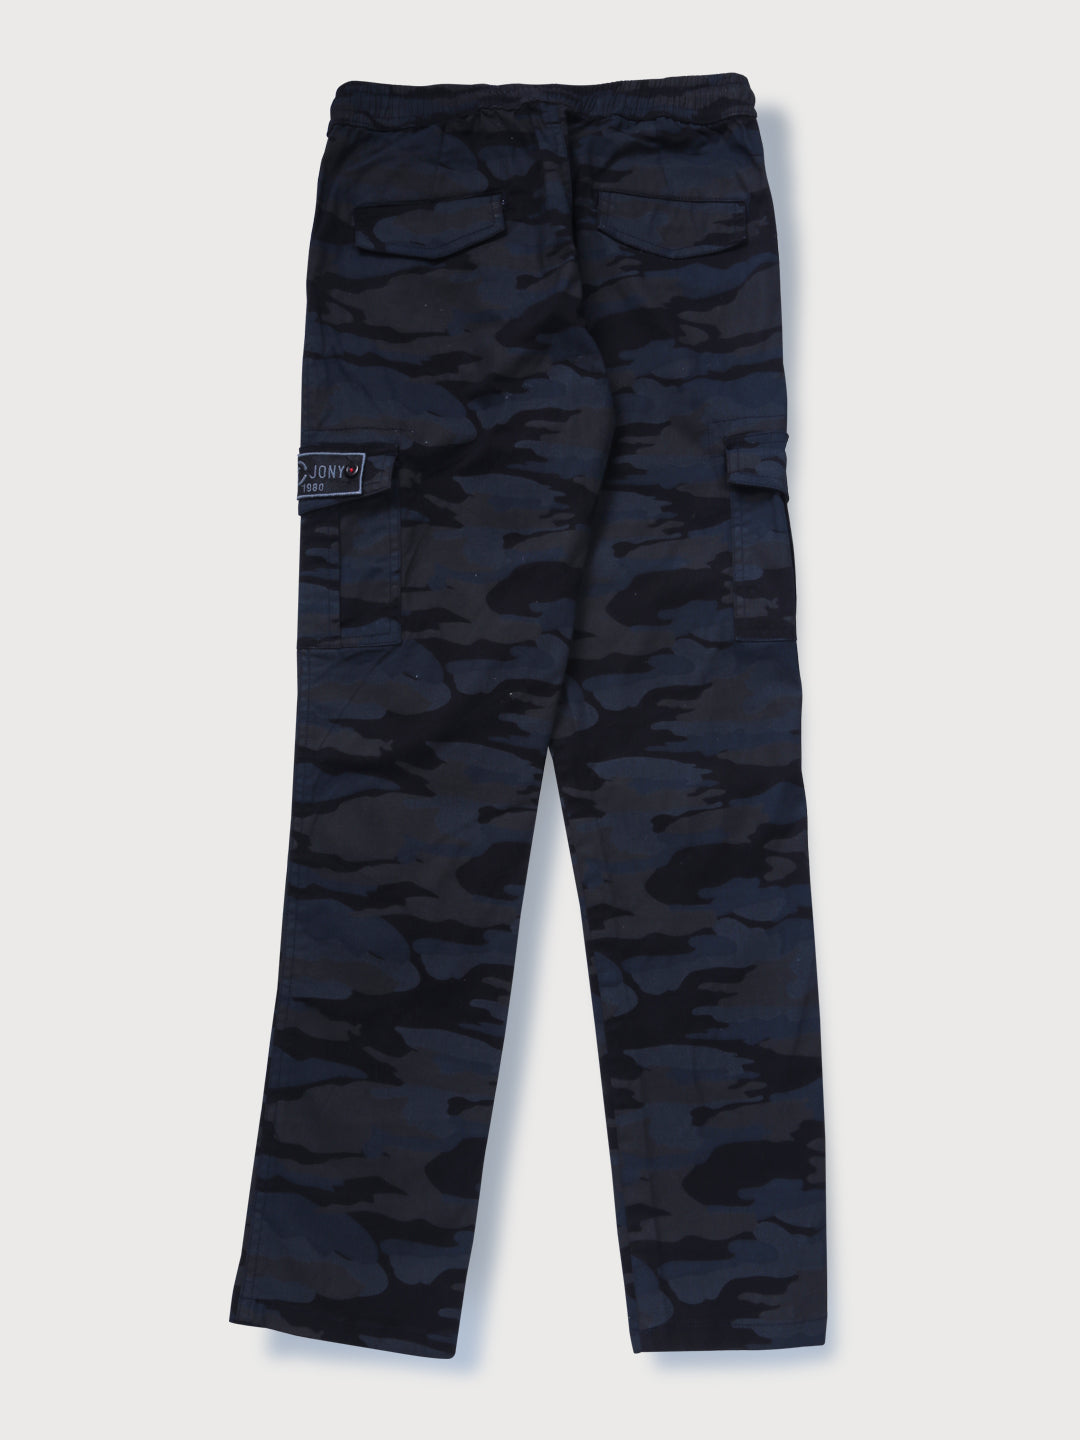 Boys Navy Blue Camouflage Woven Trouser